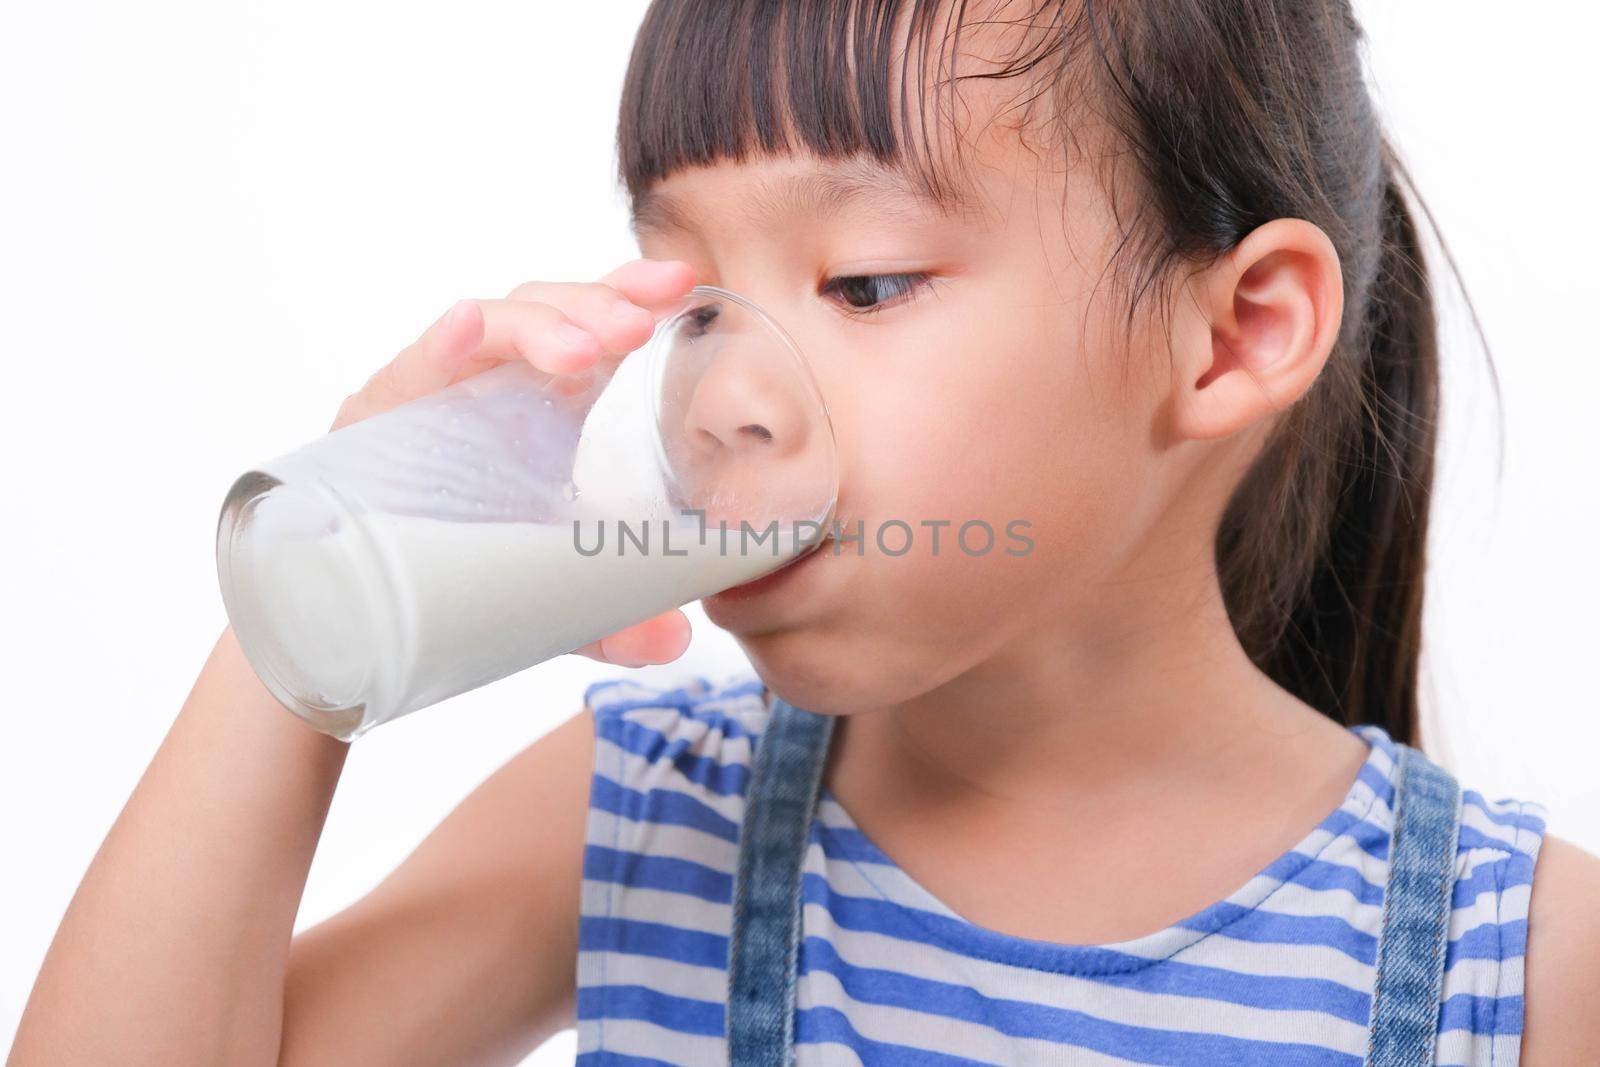 Cute little girl drinking milk from a glass isolated on white background. Little girls enjoy drinking milk before going to school.